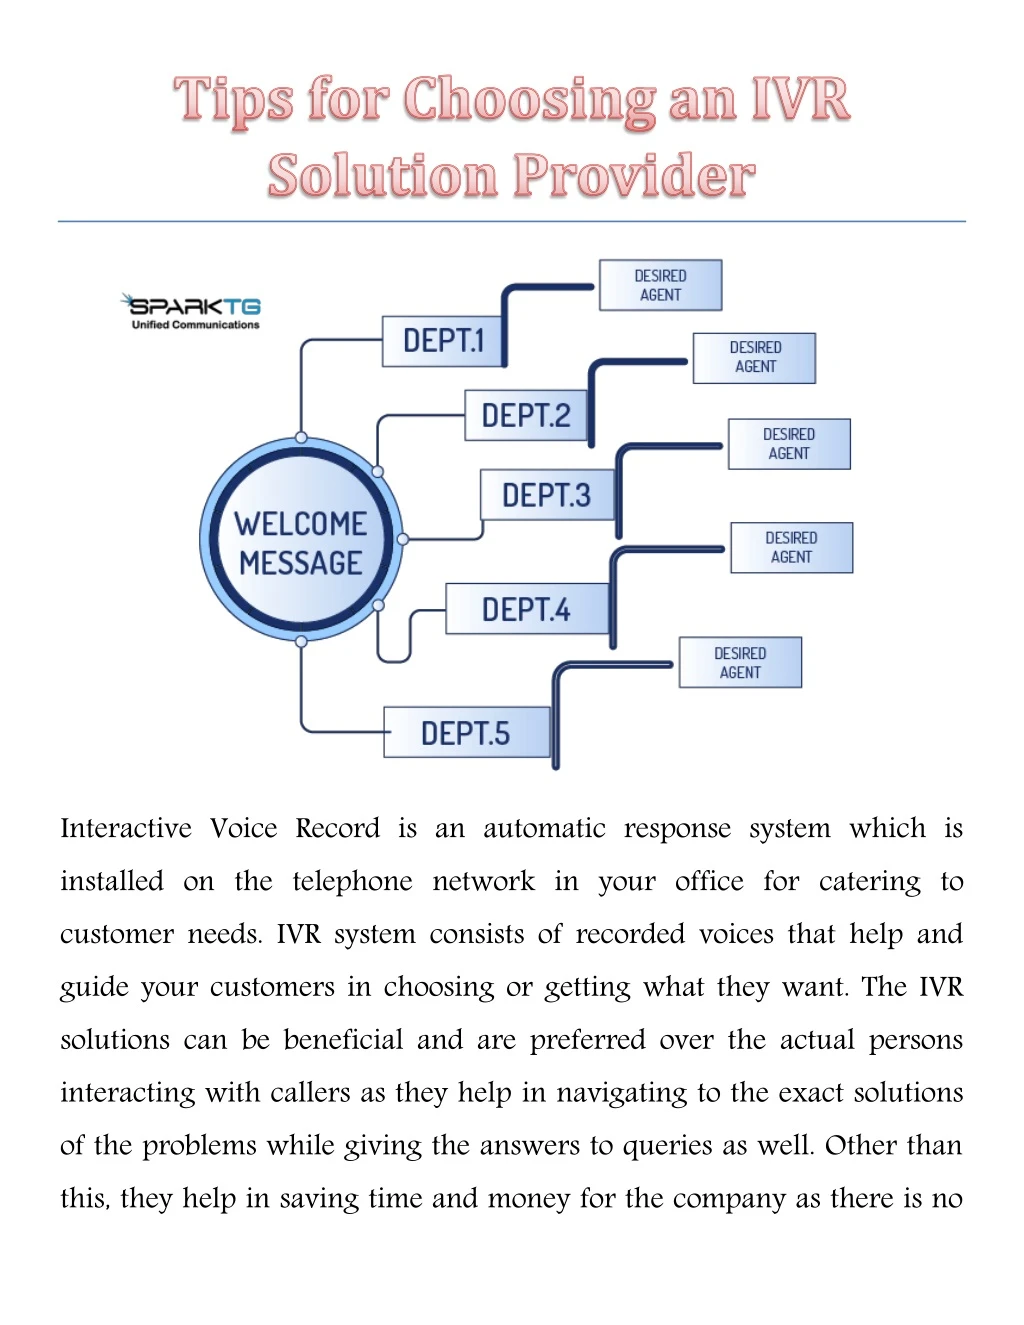 interactive voice record is an automatic response